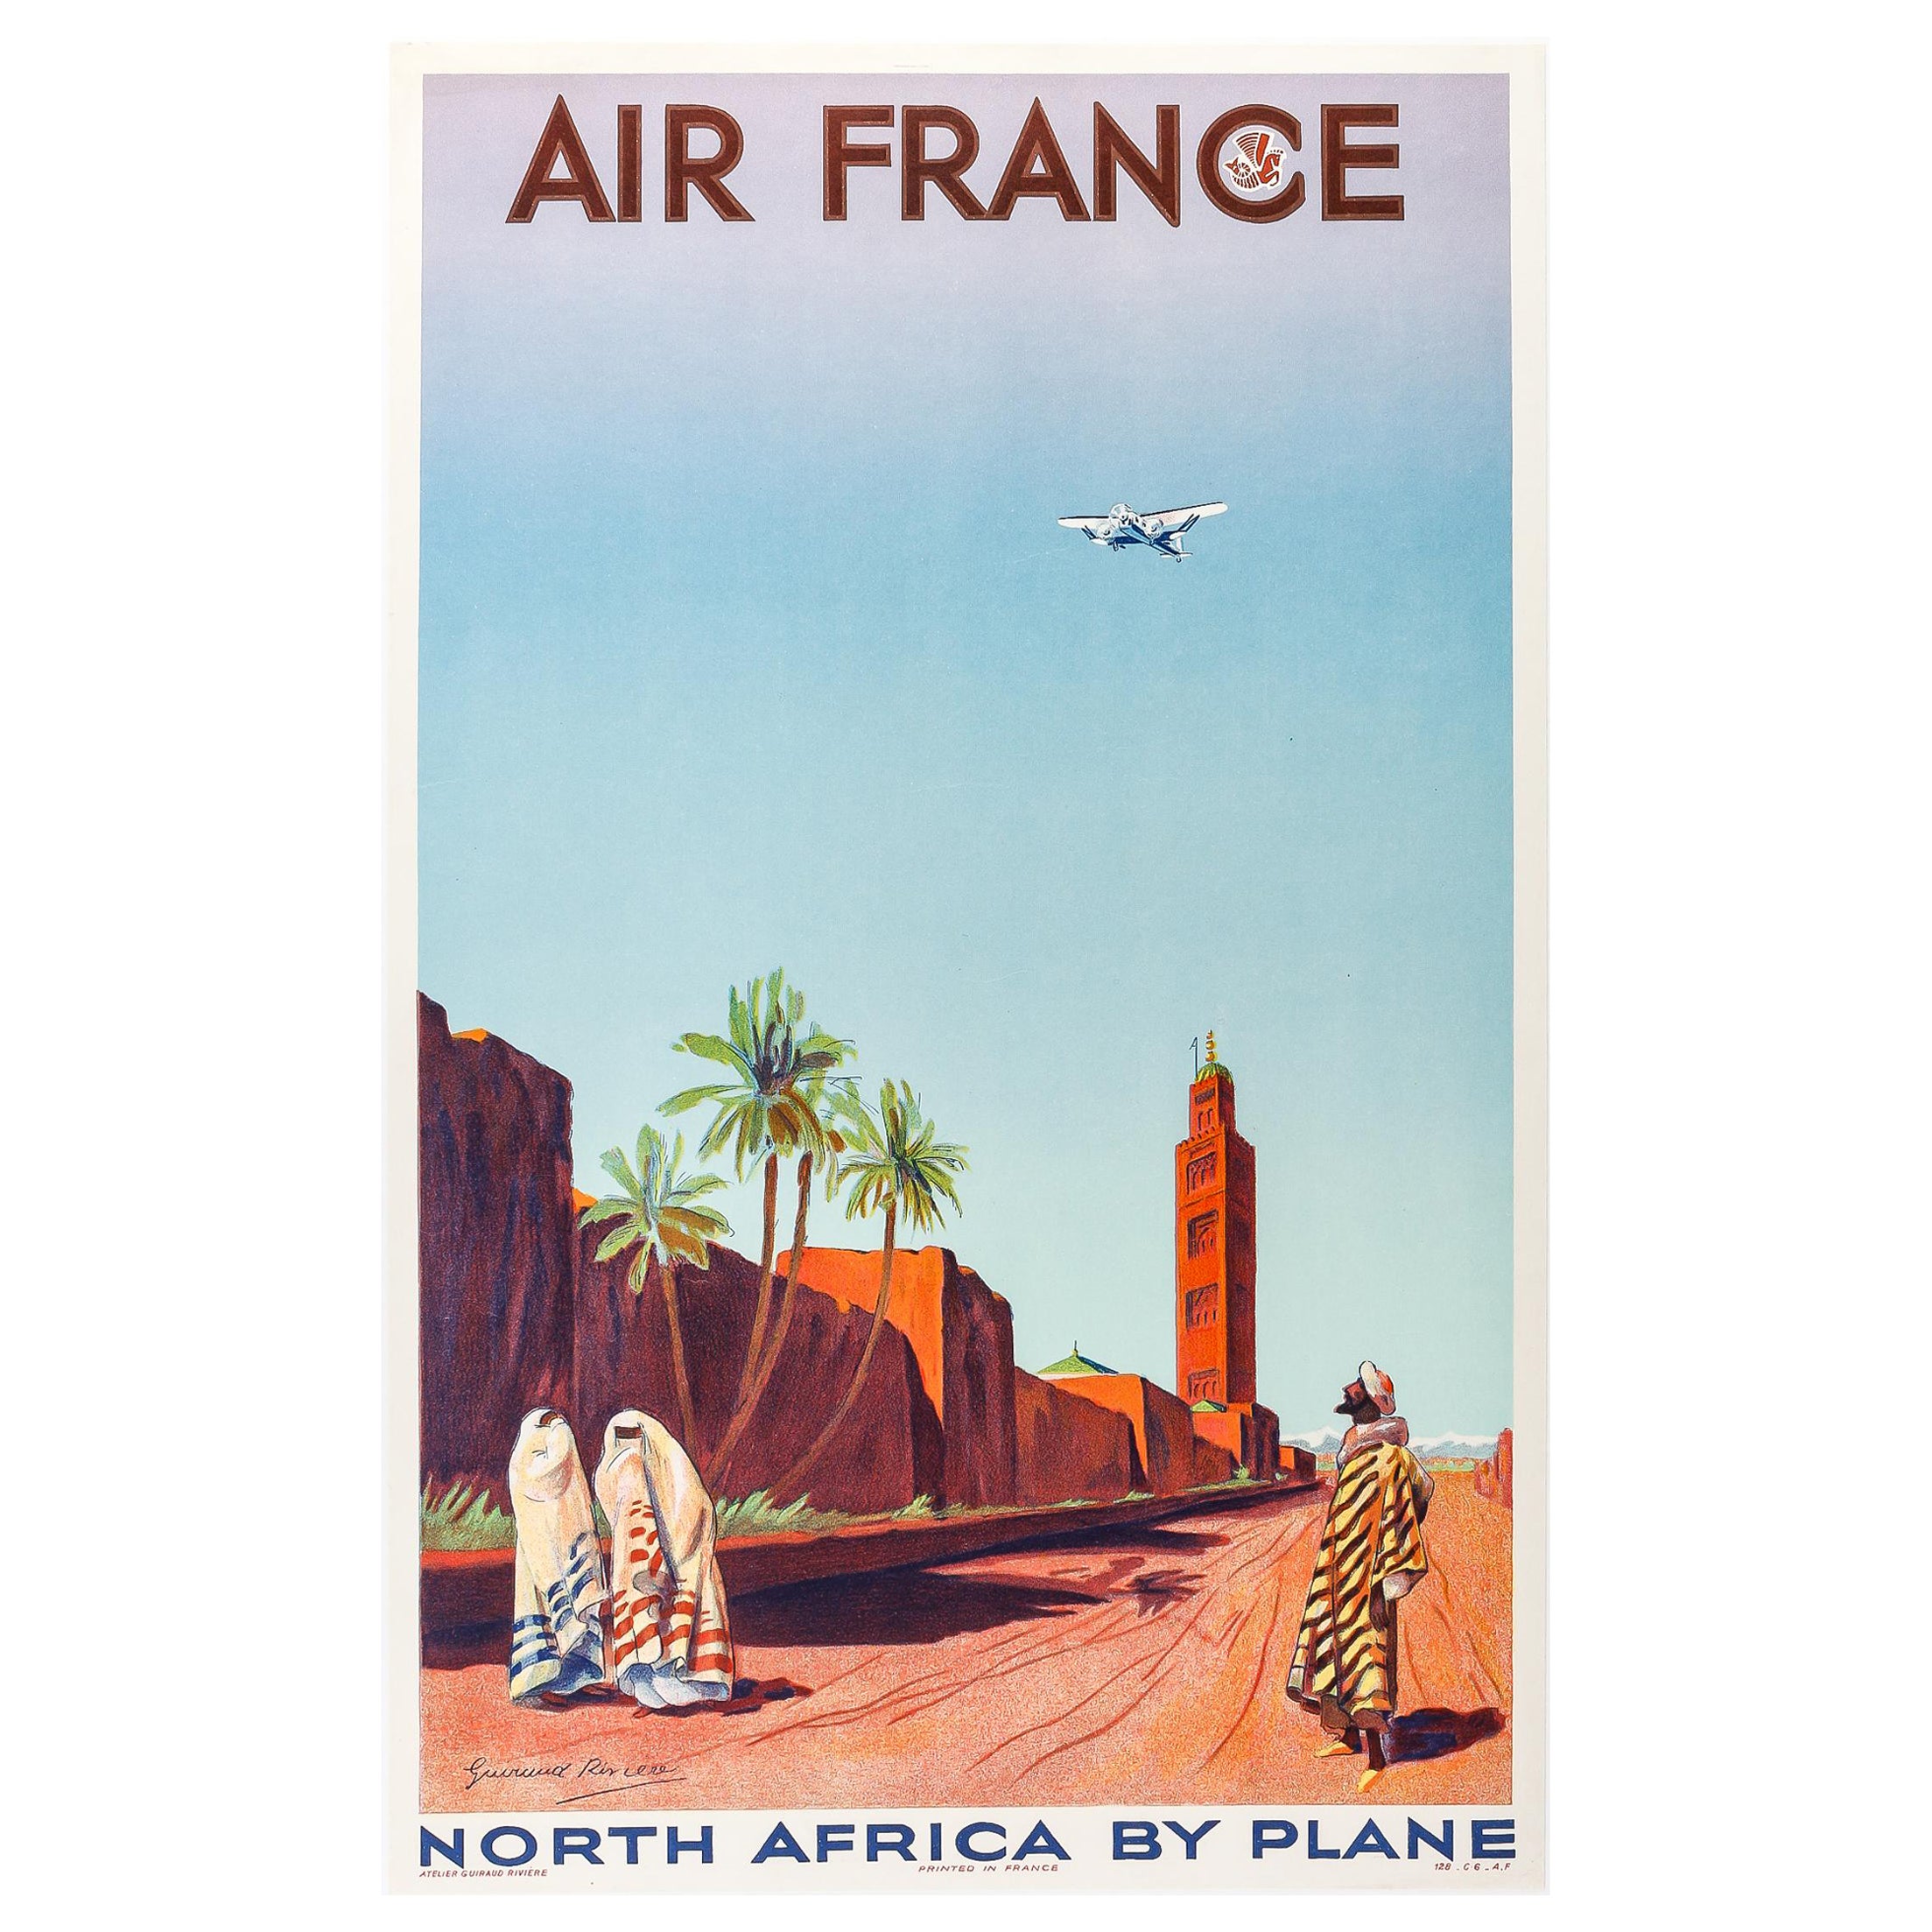 Original Air France Poster, North Africa by plane, Morocco Atlas, Koutoubia 1934